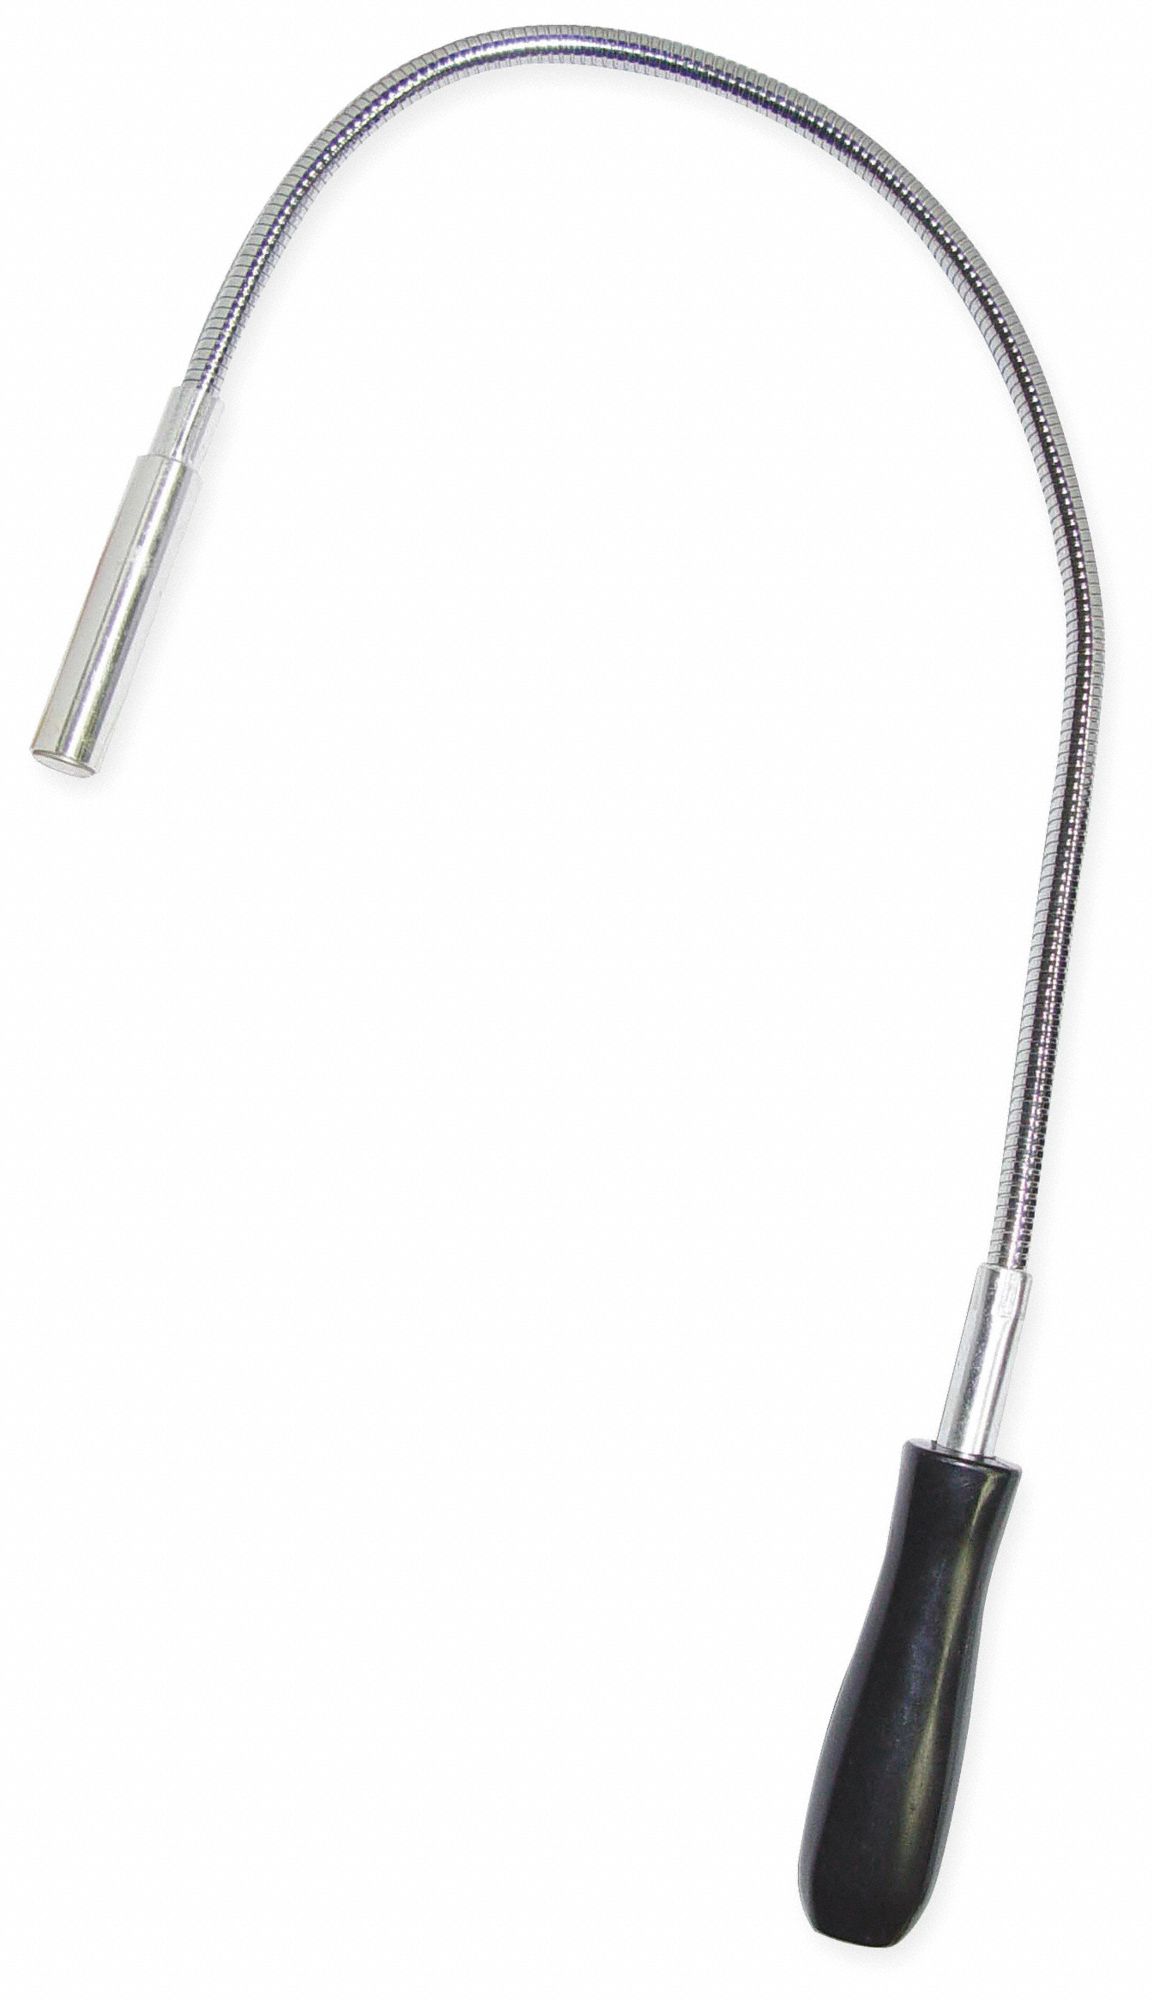 AIMANT OUTIL FLEXIBLE PICKUP